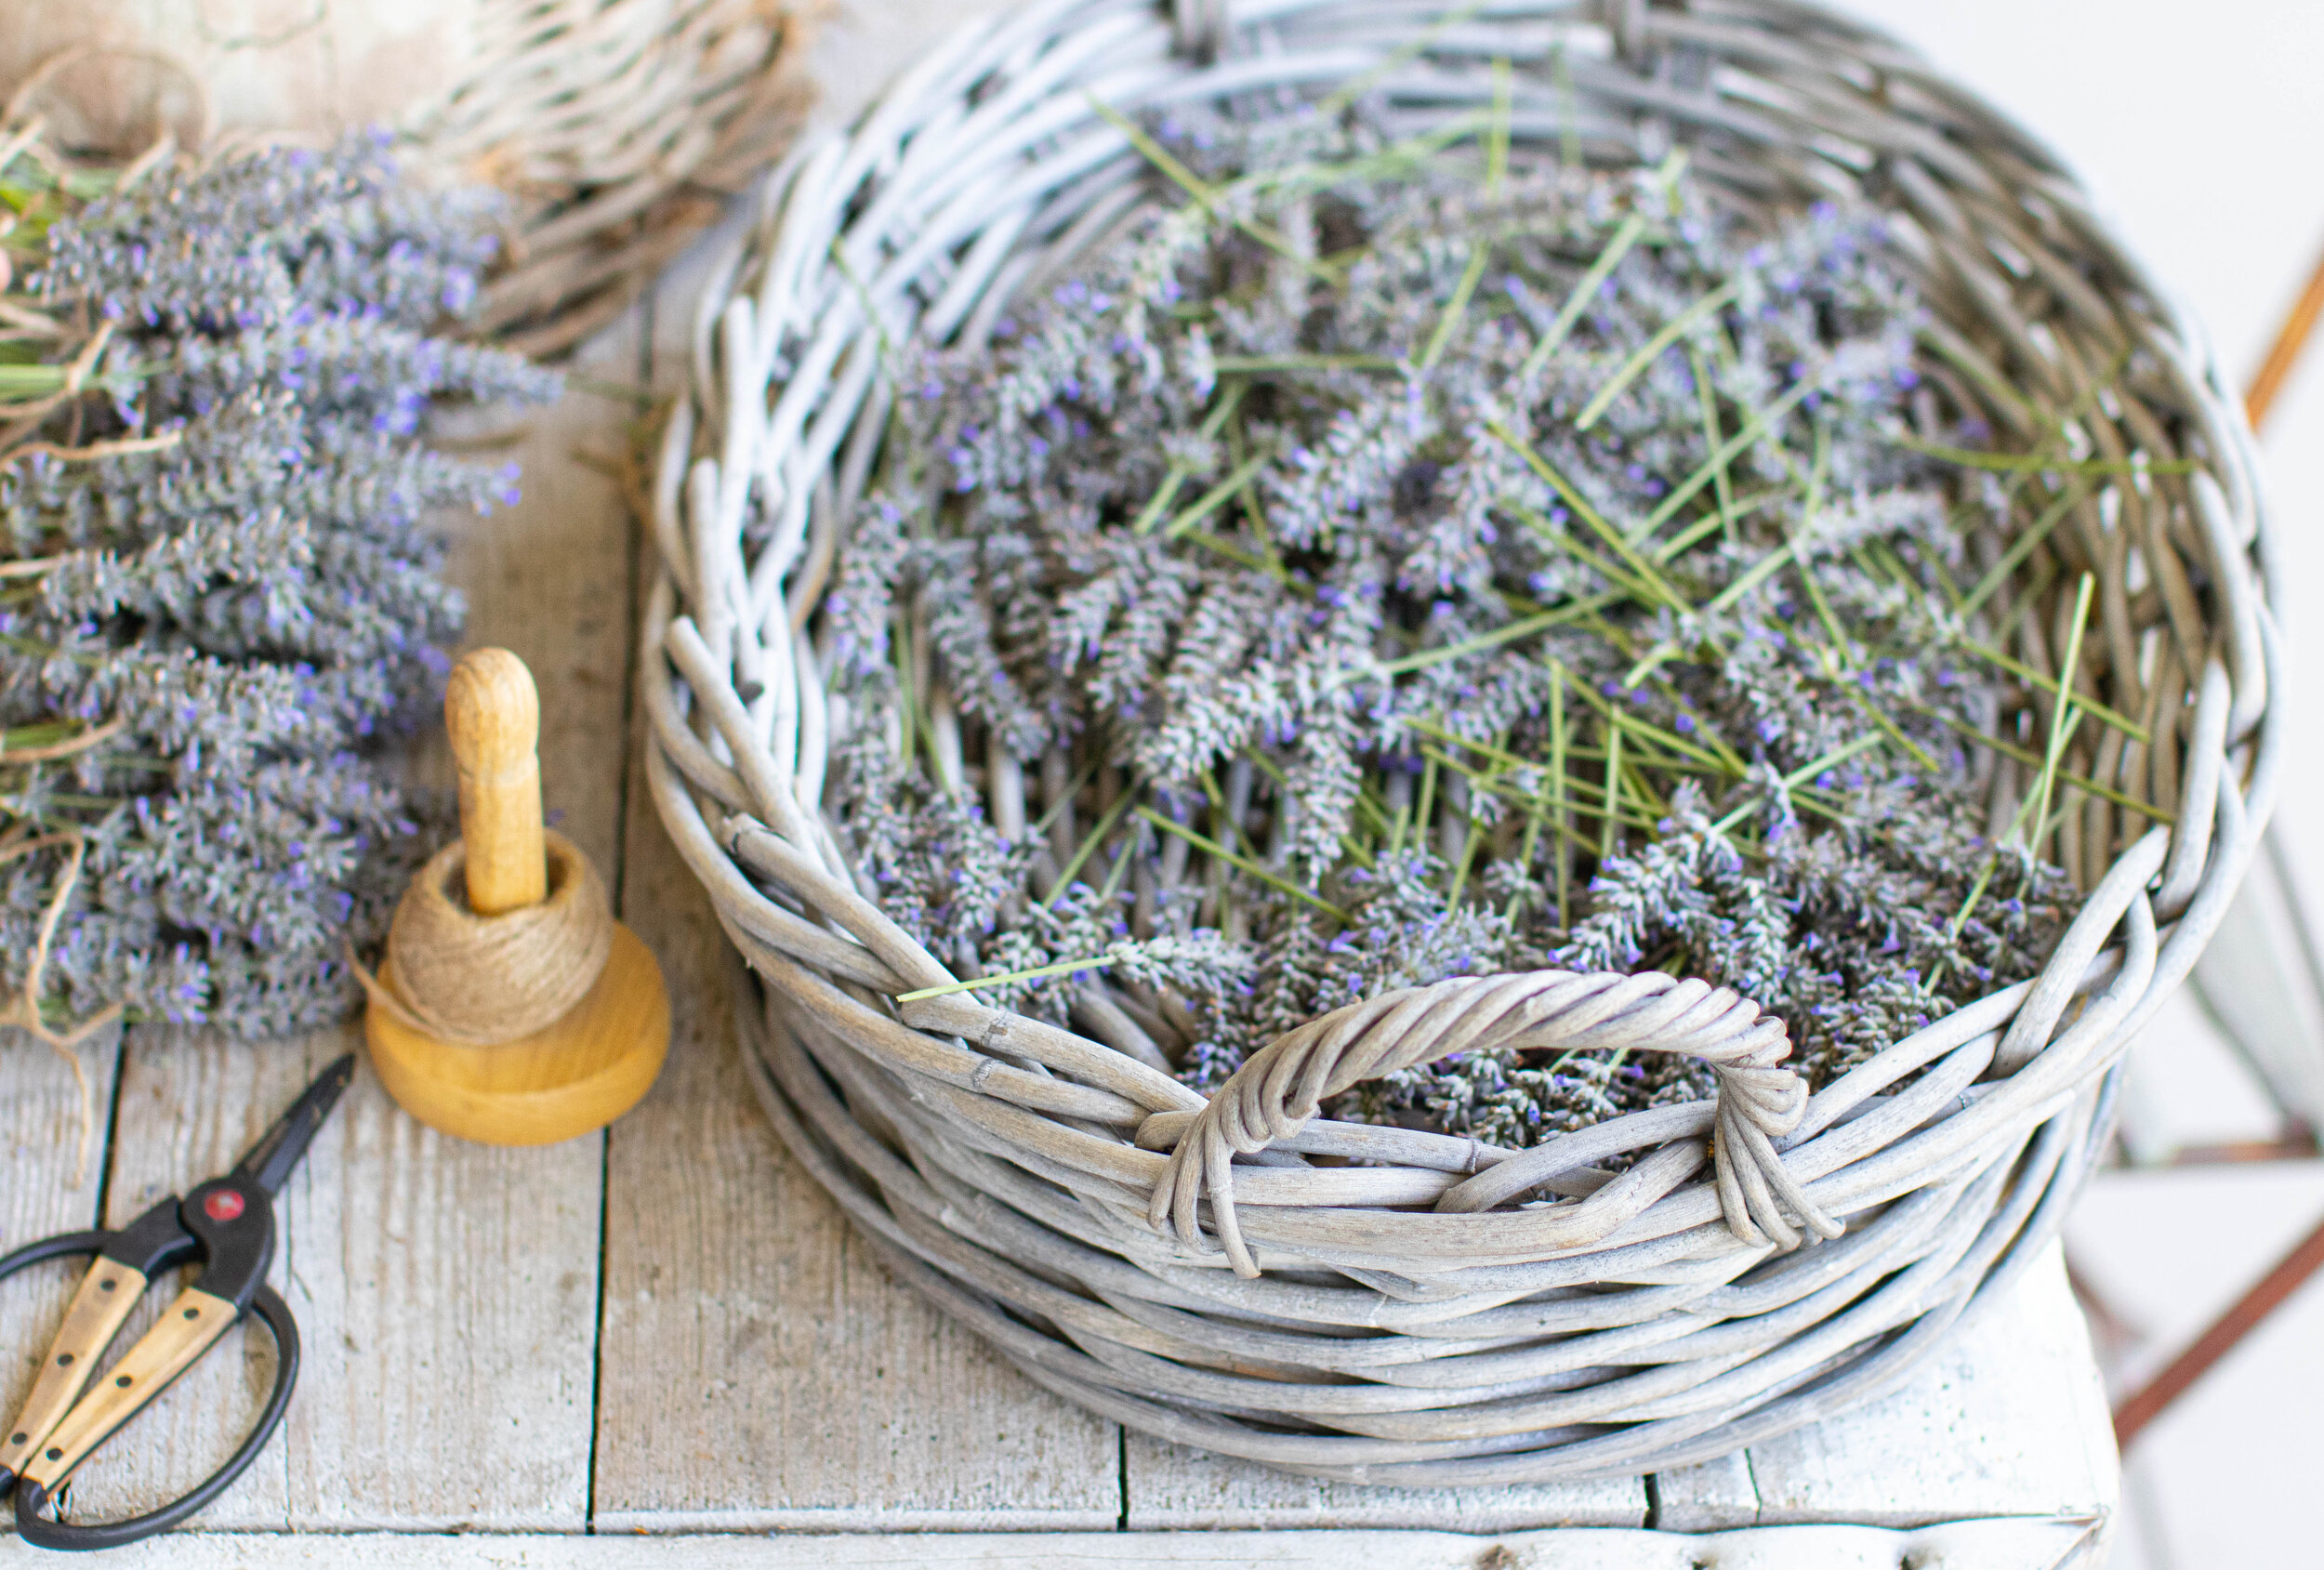 Chateau Sonoma, France, French Antiques, Self Care, Lavender, Self Love, Sonoma, California, French Lifestyle, French Inspired, Self Care Practices